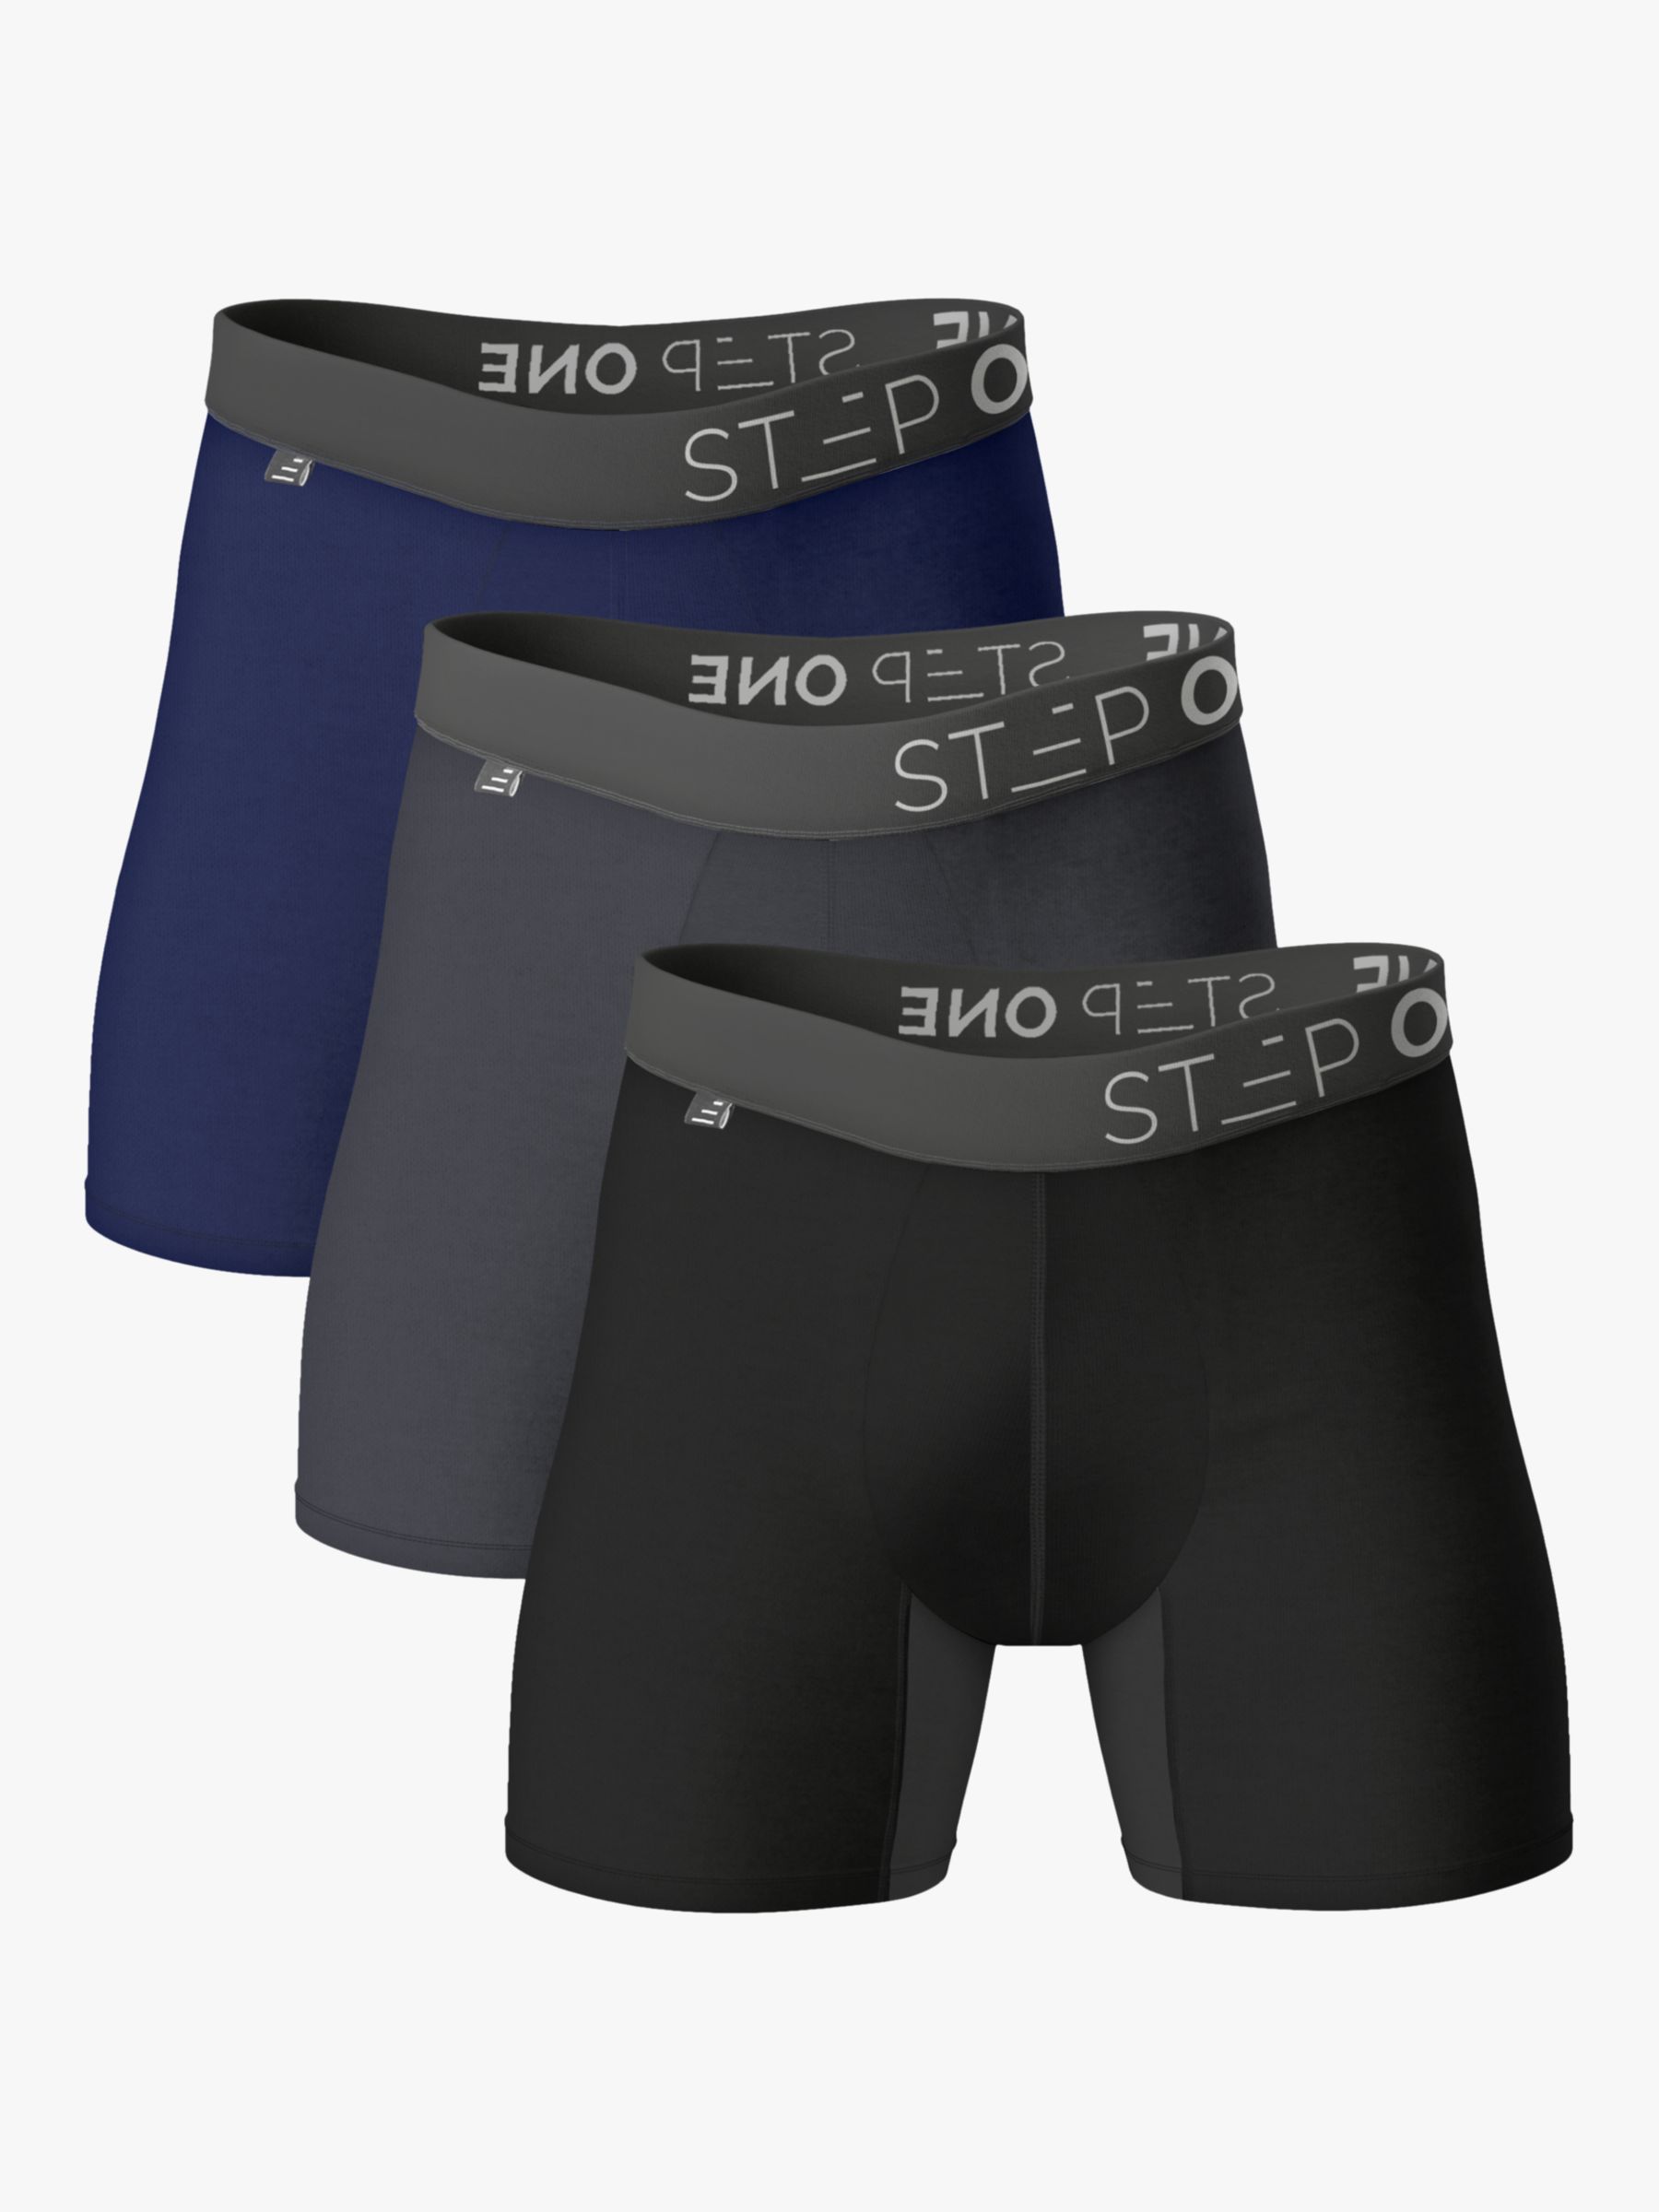 Step One Bamboo Trunks, Pack of 3, Black/Grey/Navy, XXS